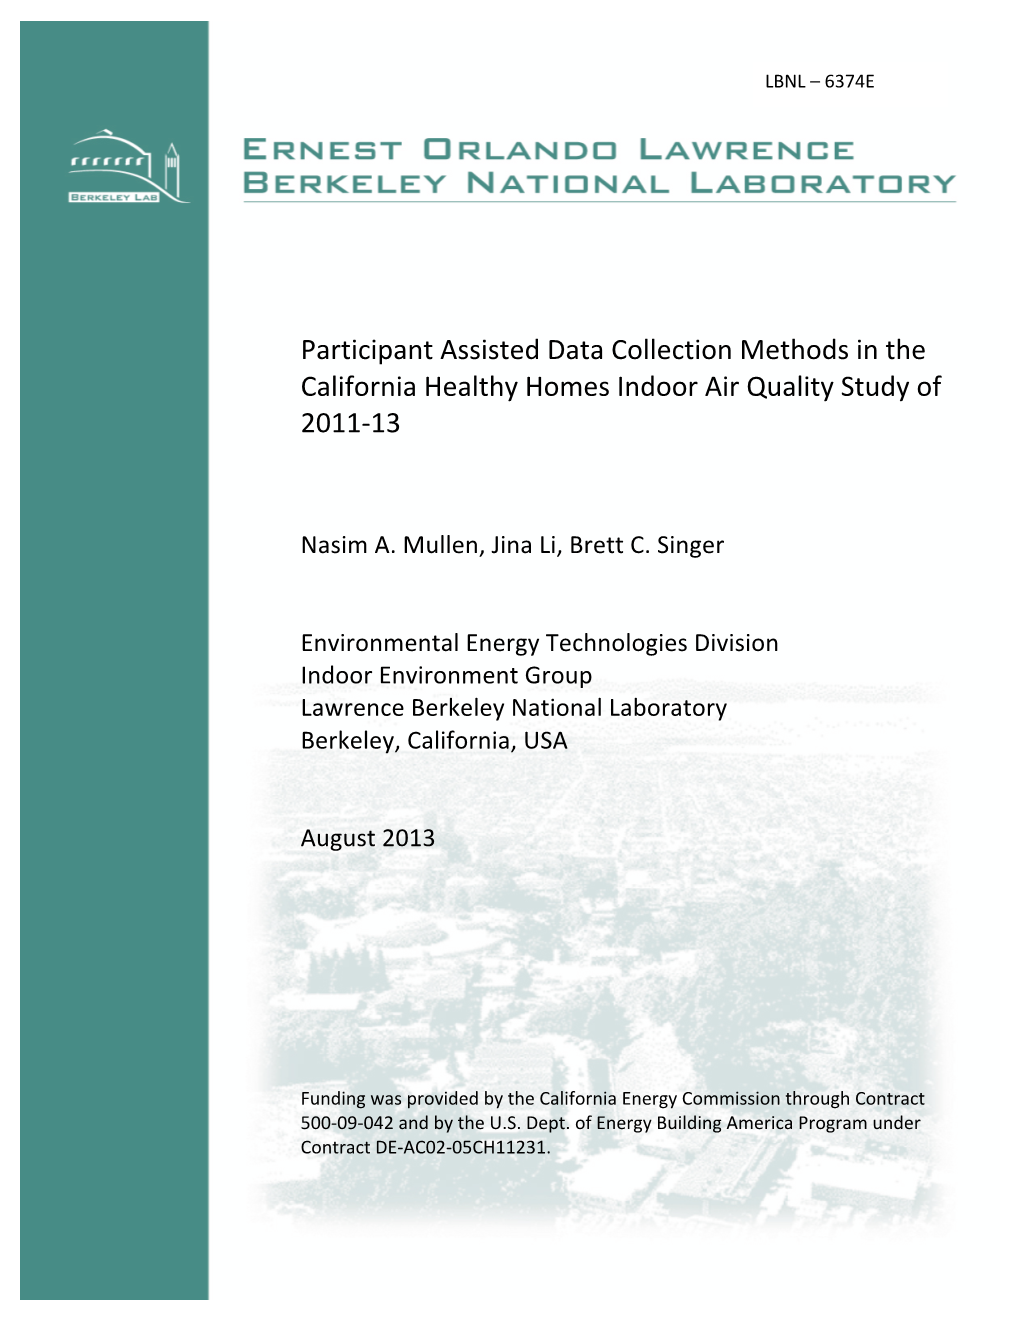 Participant Assisted Data Collection Methods in the California Healthy Homes Indoor Air Quality Study of 2011-­‐13